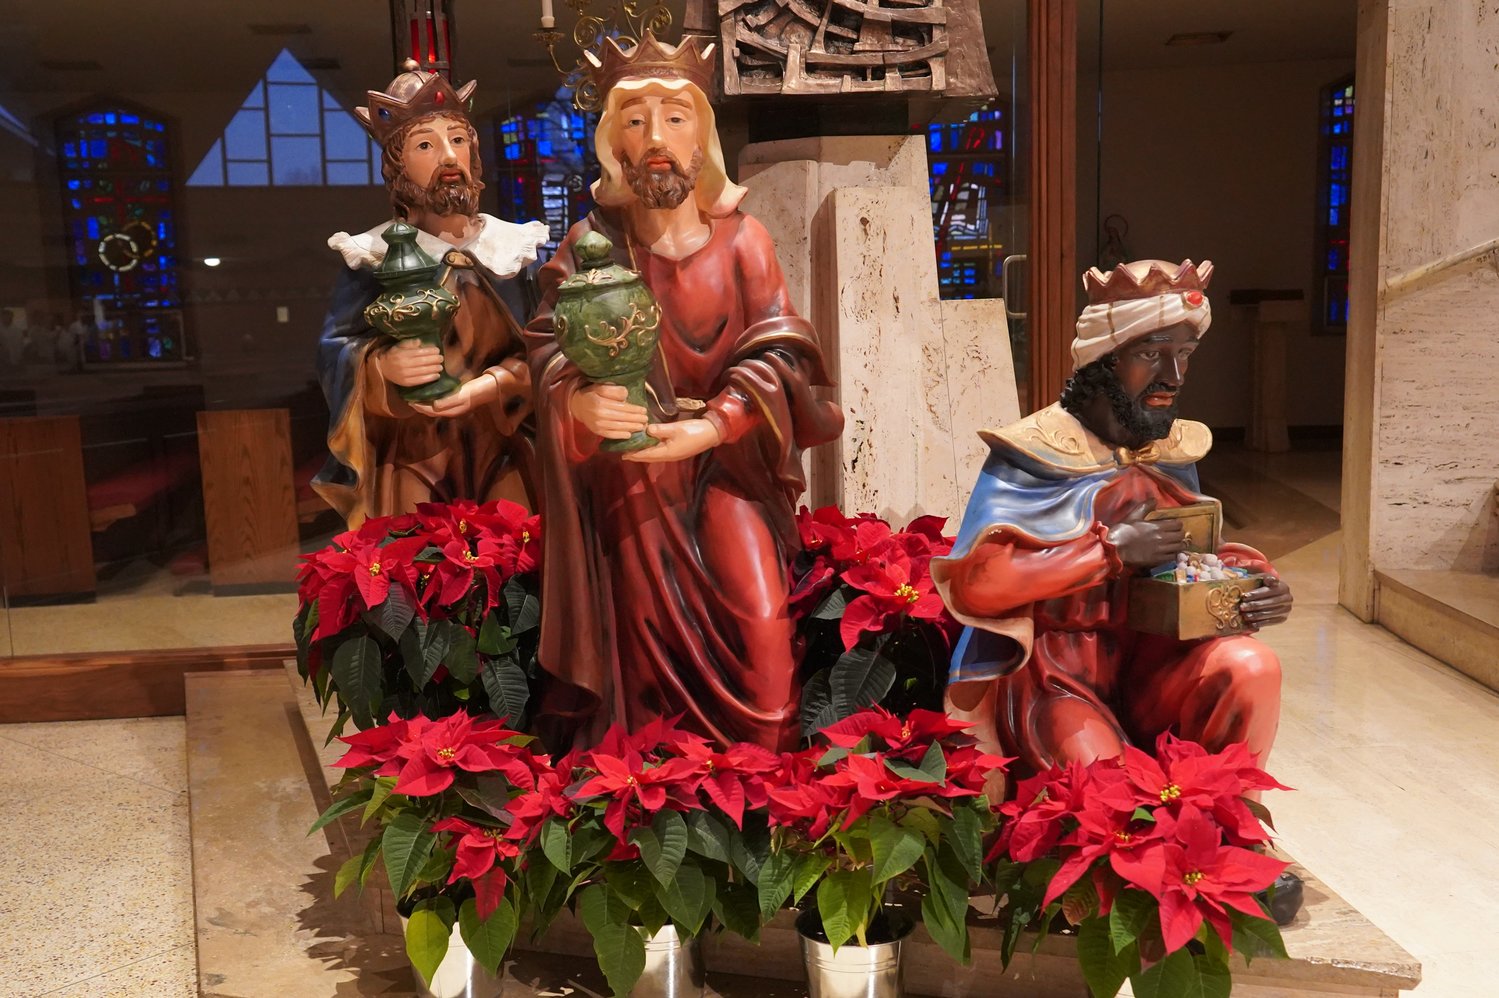 These statues of the Three Wise Men adorned the sanctuary of the Cathedral of St. Joseph during the Christmas Season.